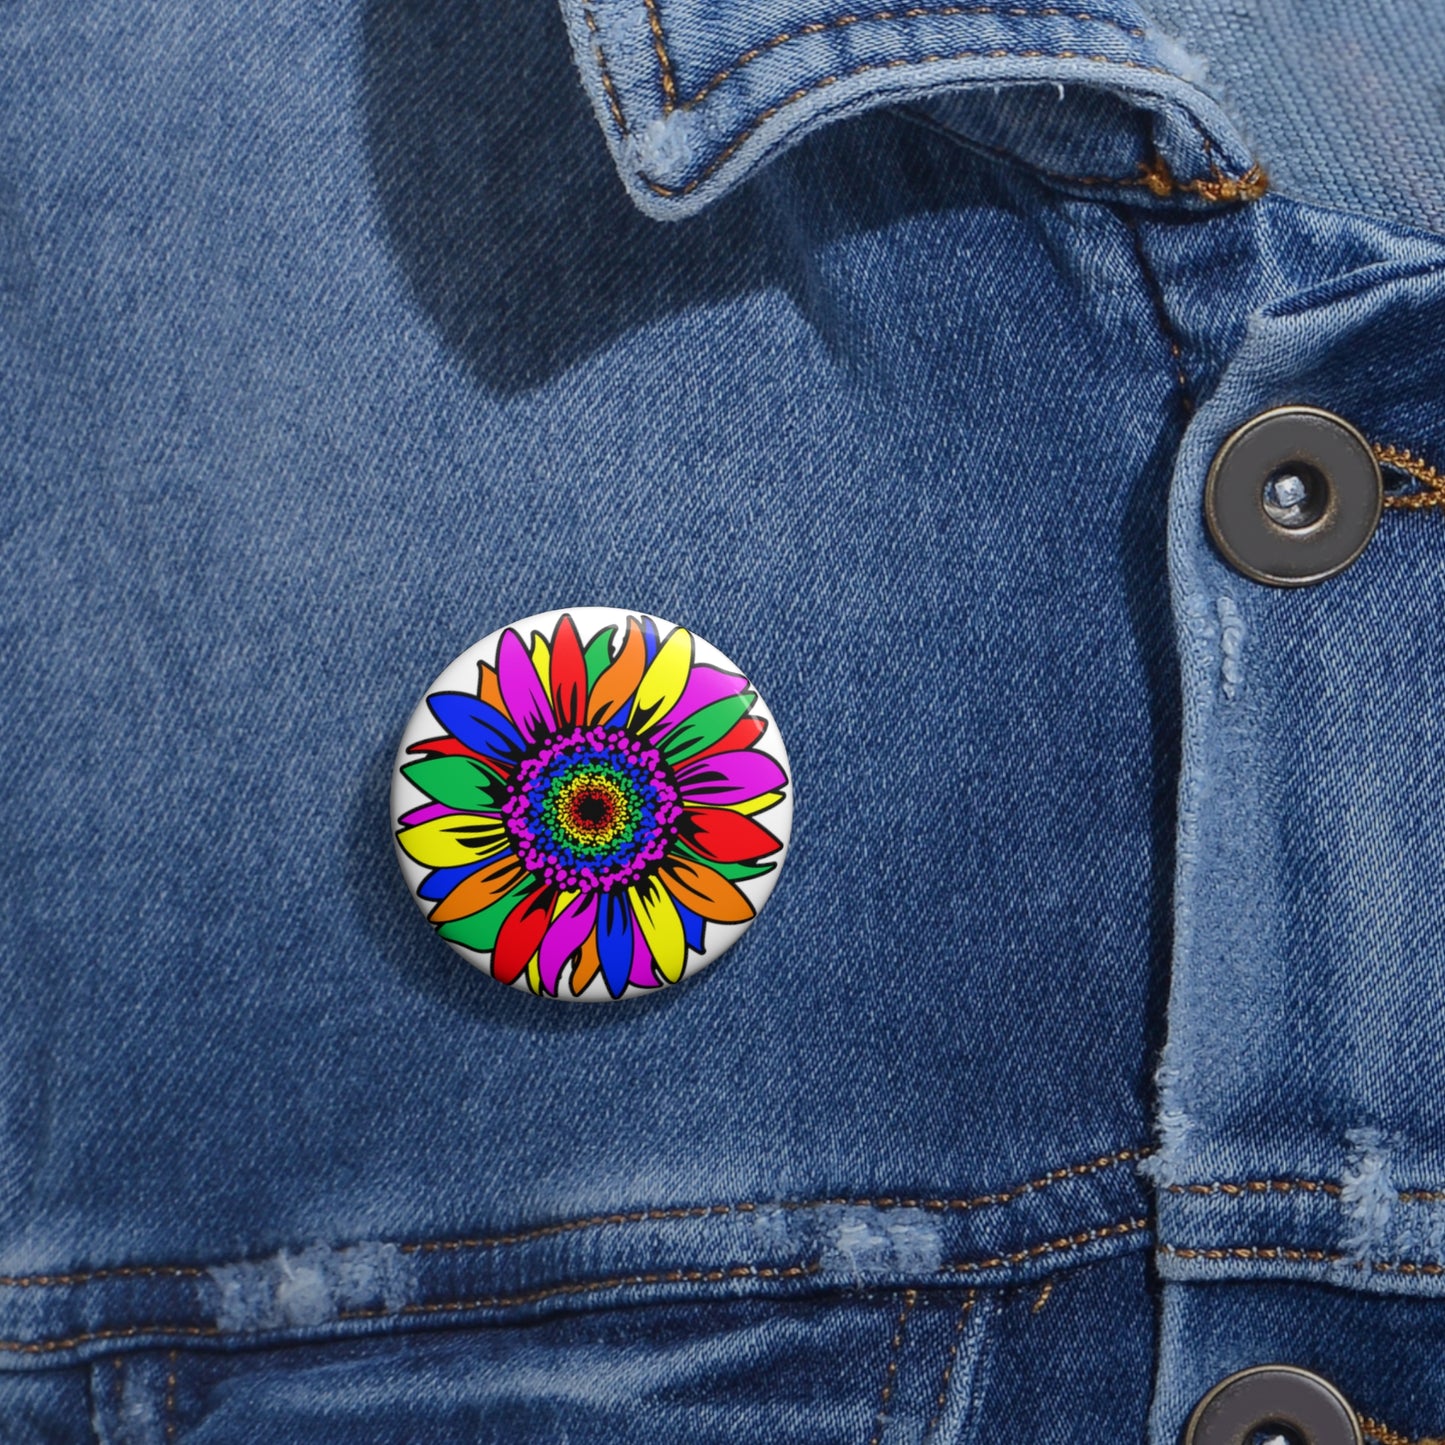 Rainbow Sunflower Buttons: 3 sizes; Pin-back; Metal; Peace